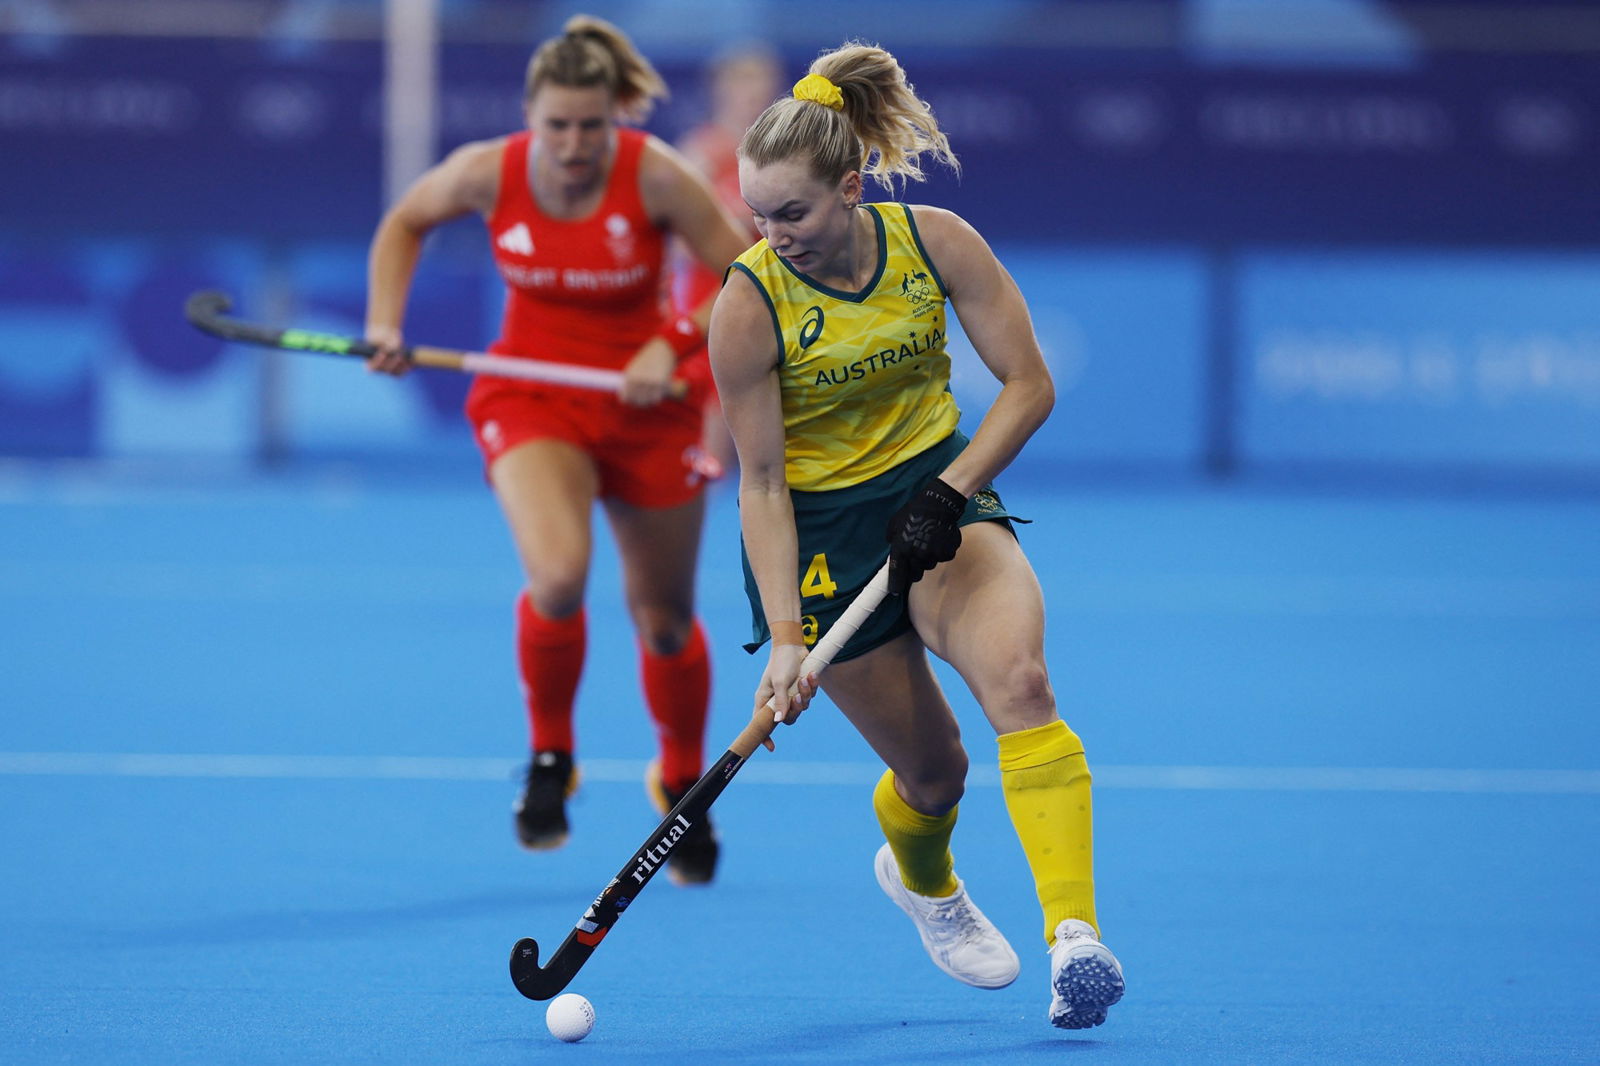 The hockeyroos in action